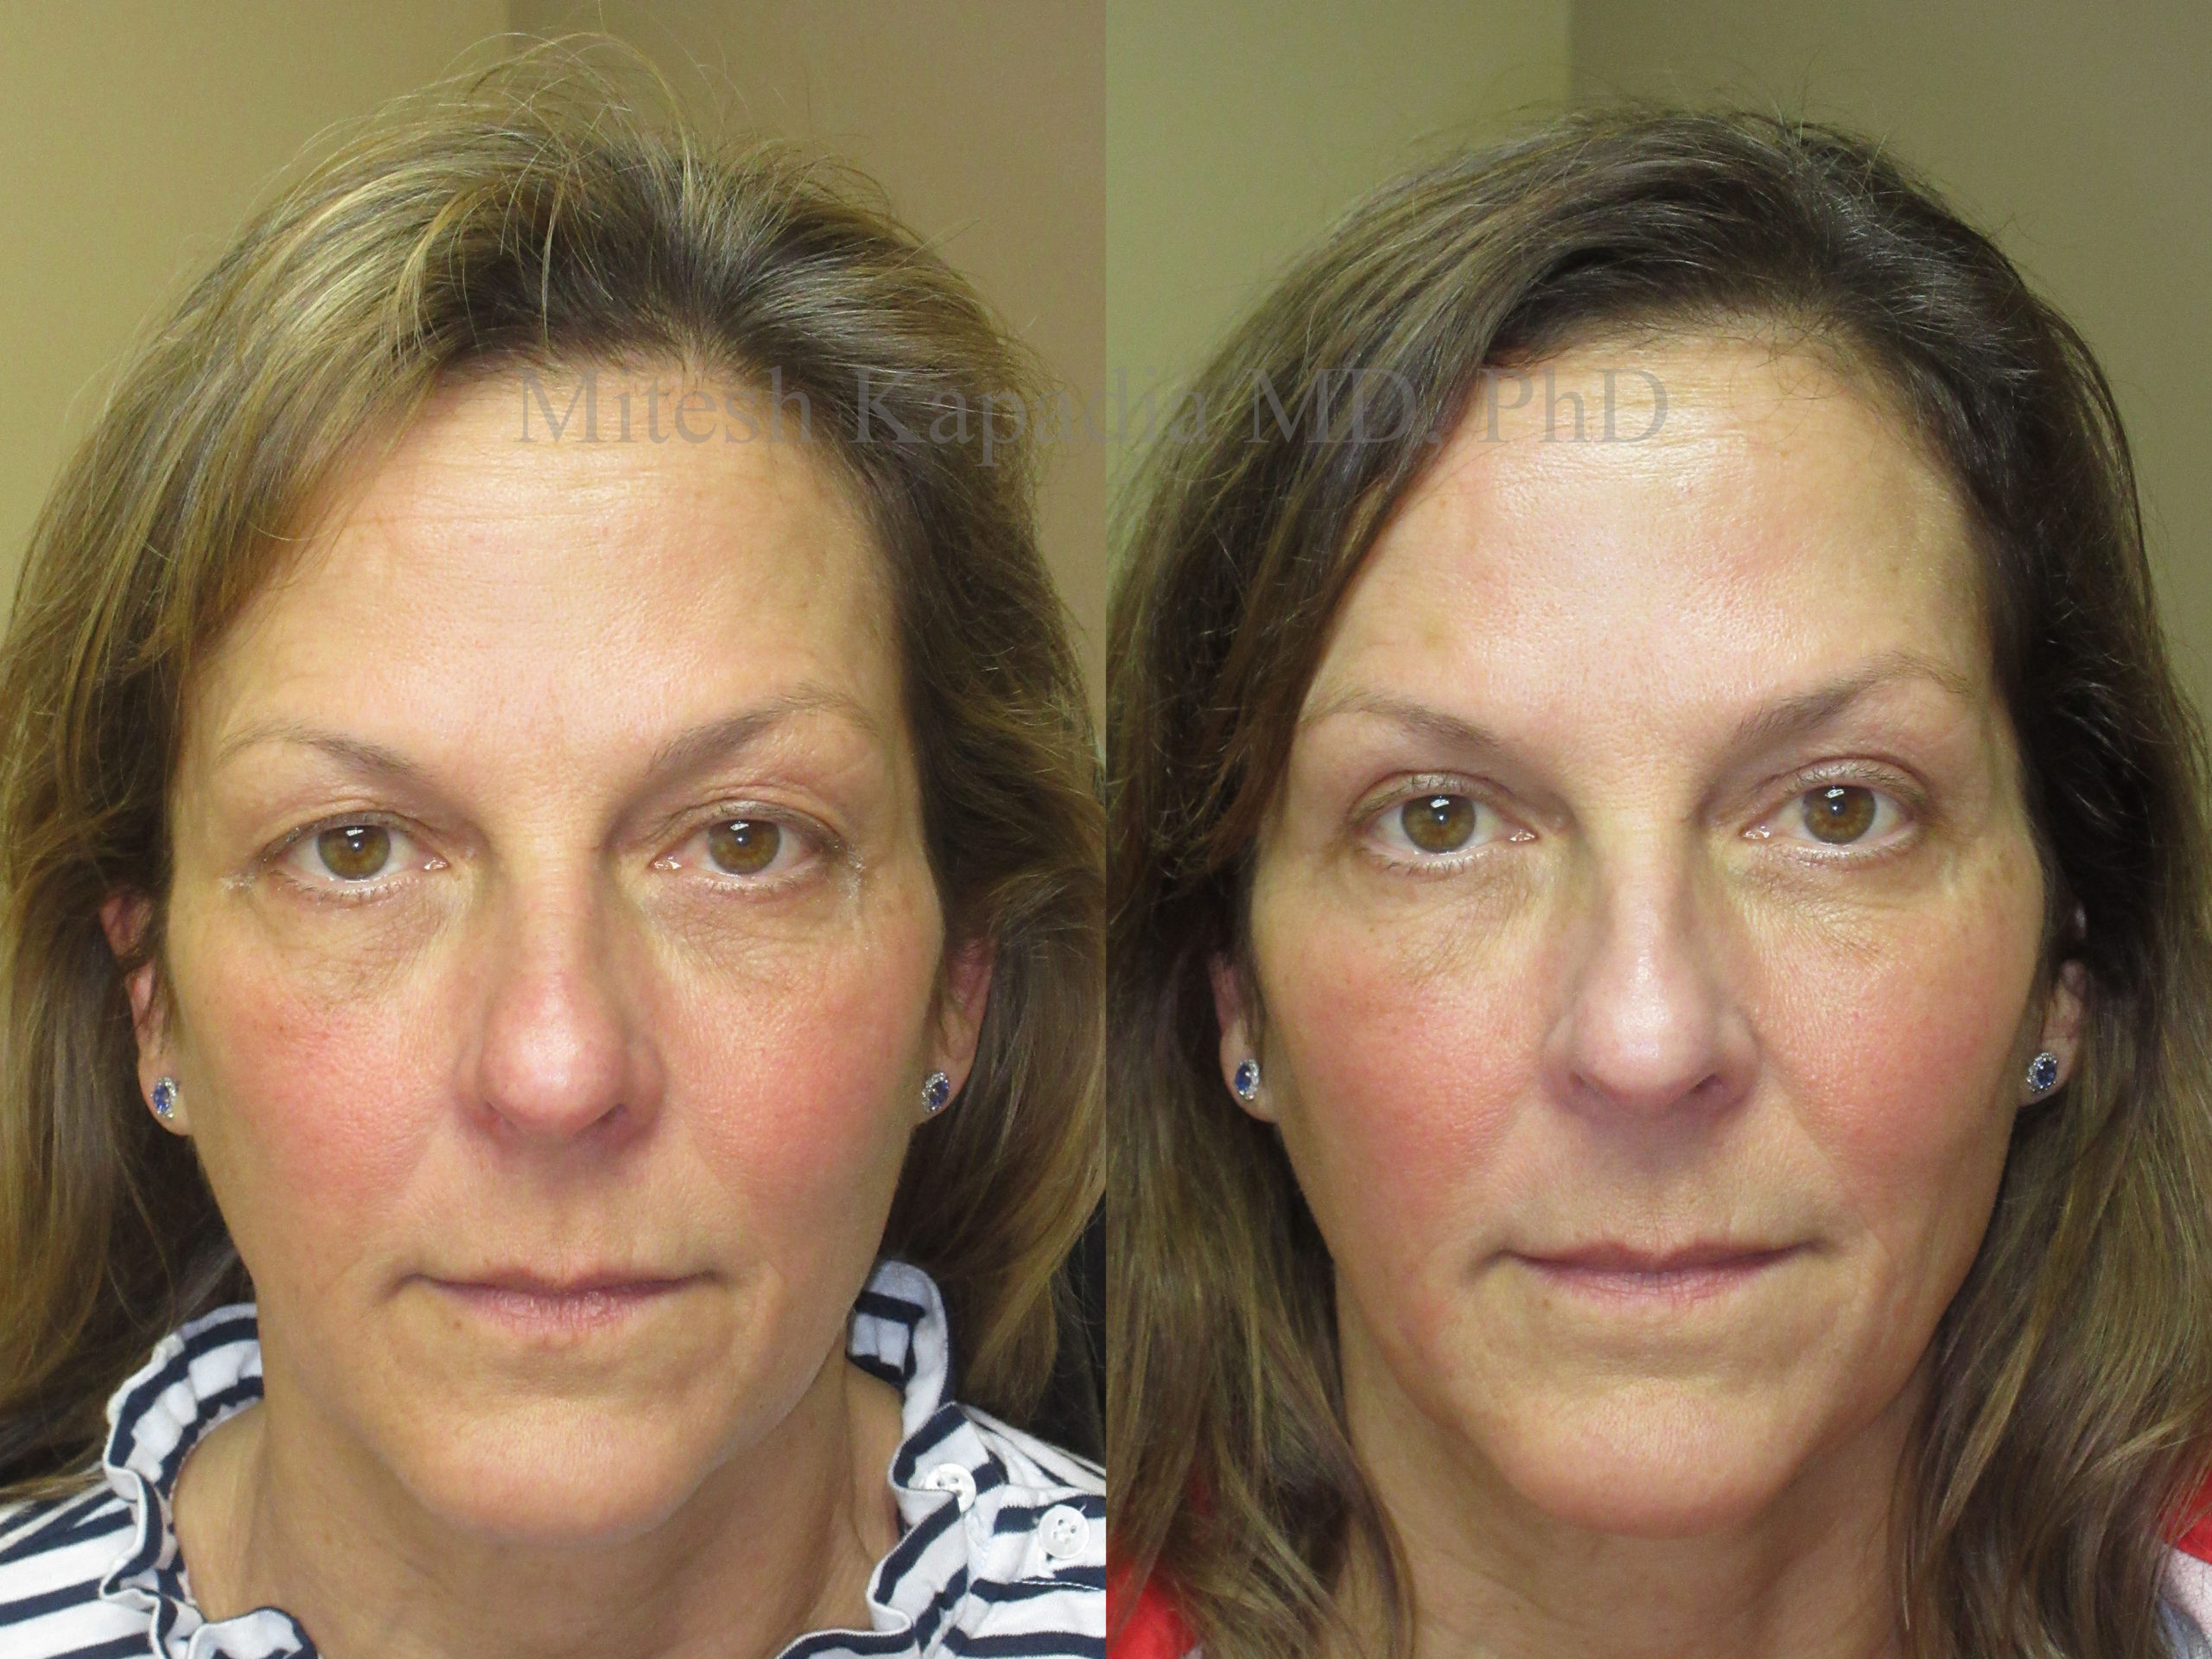 Upper Blepharoplasty Before and After Photos